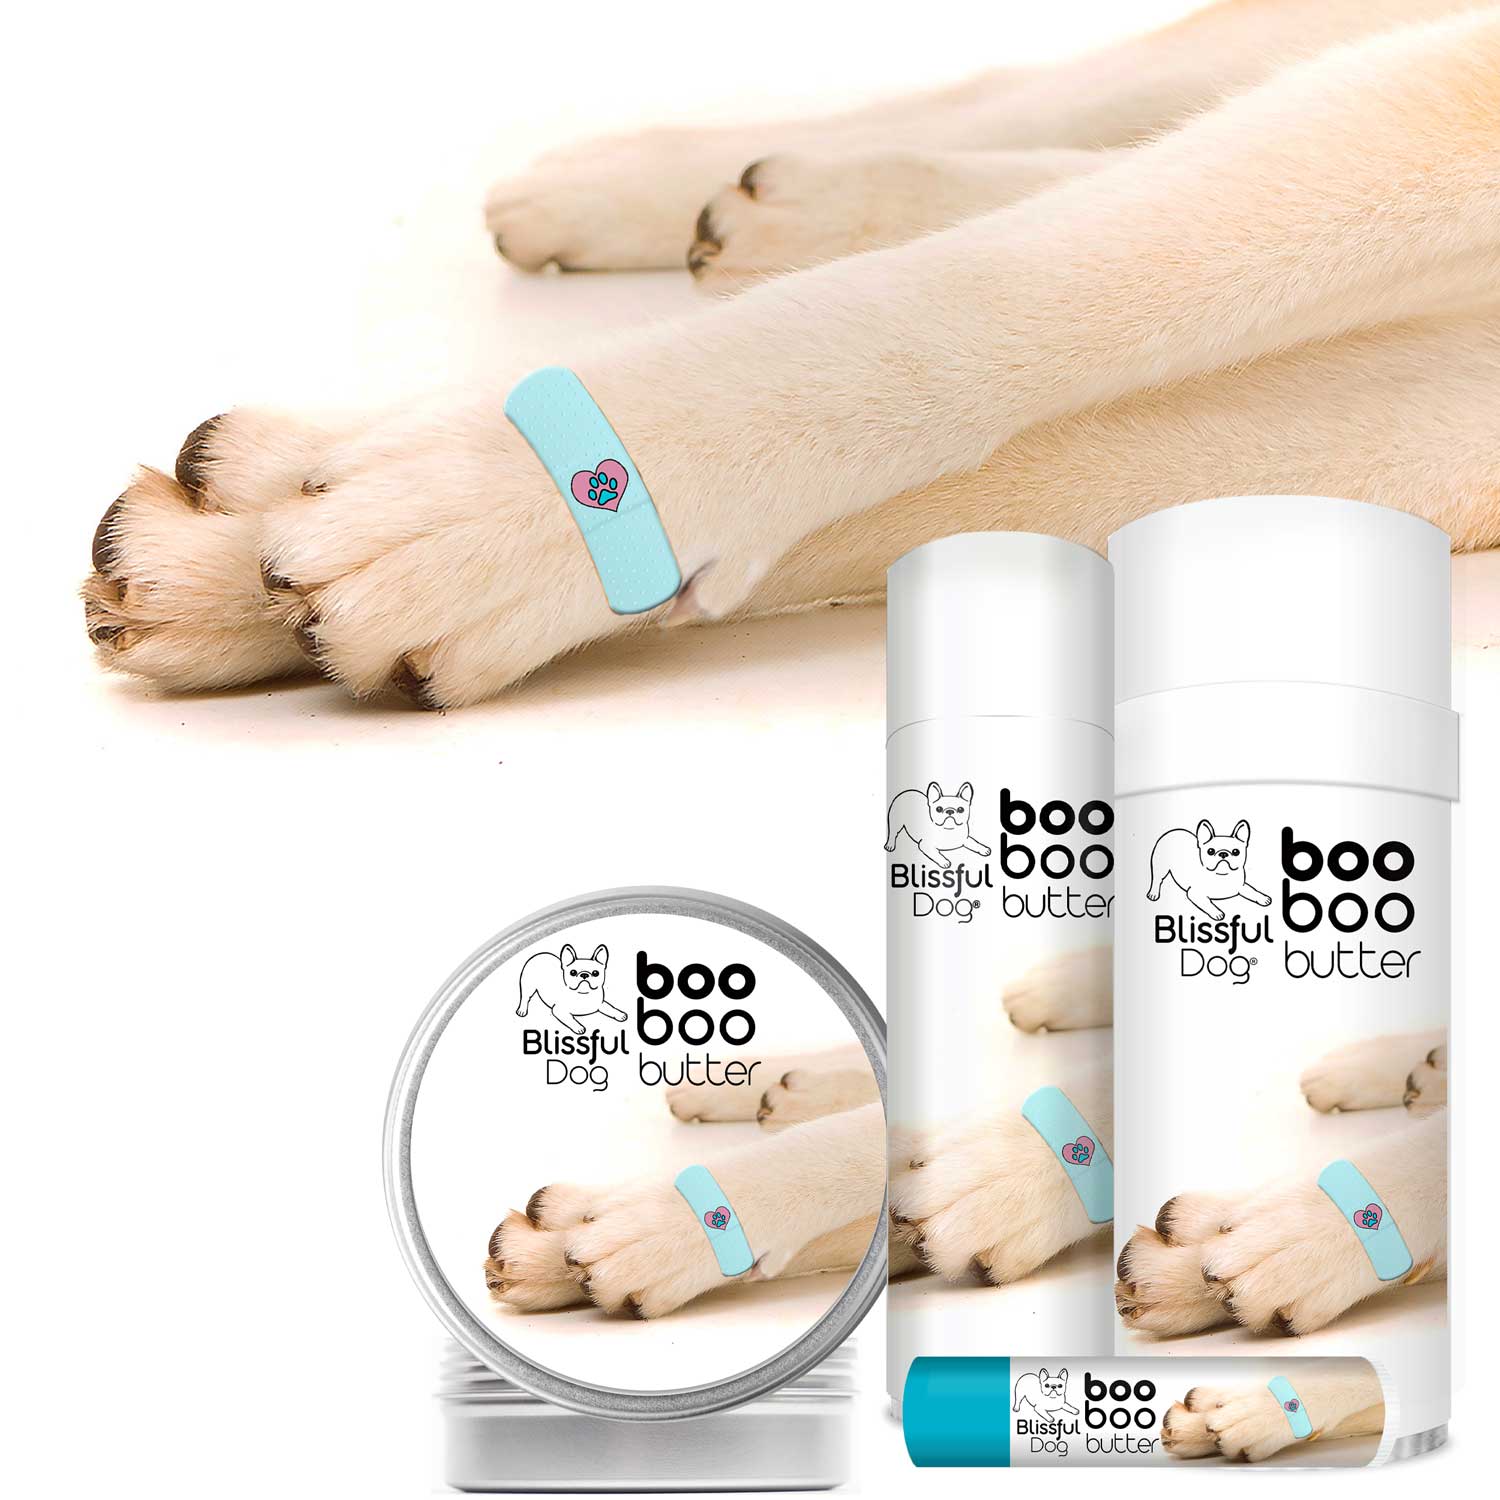 ALL NATURAL SKIN CARE FOR DOGS